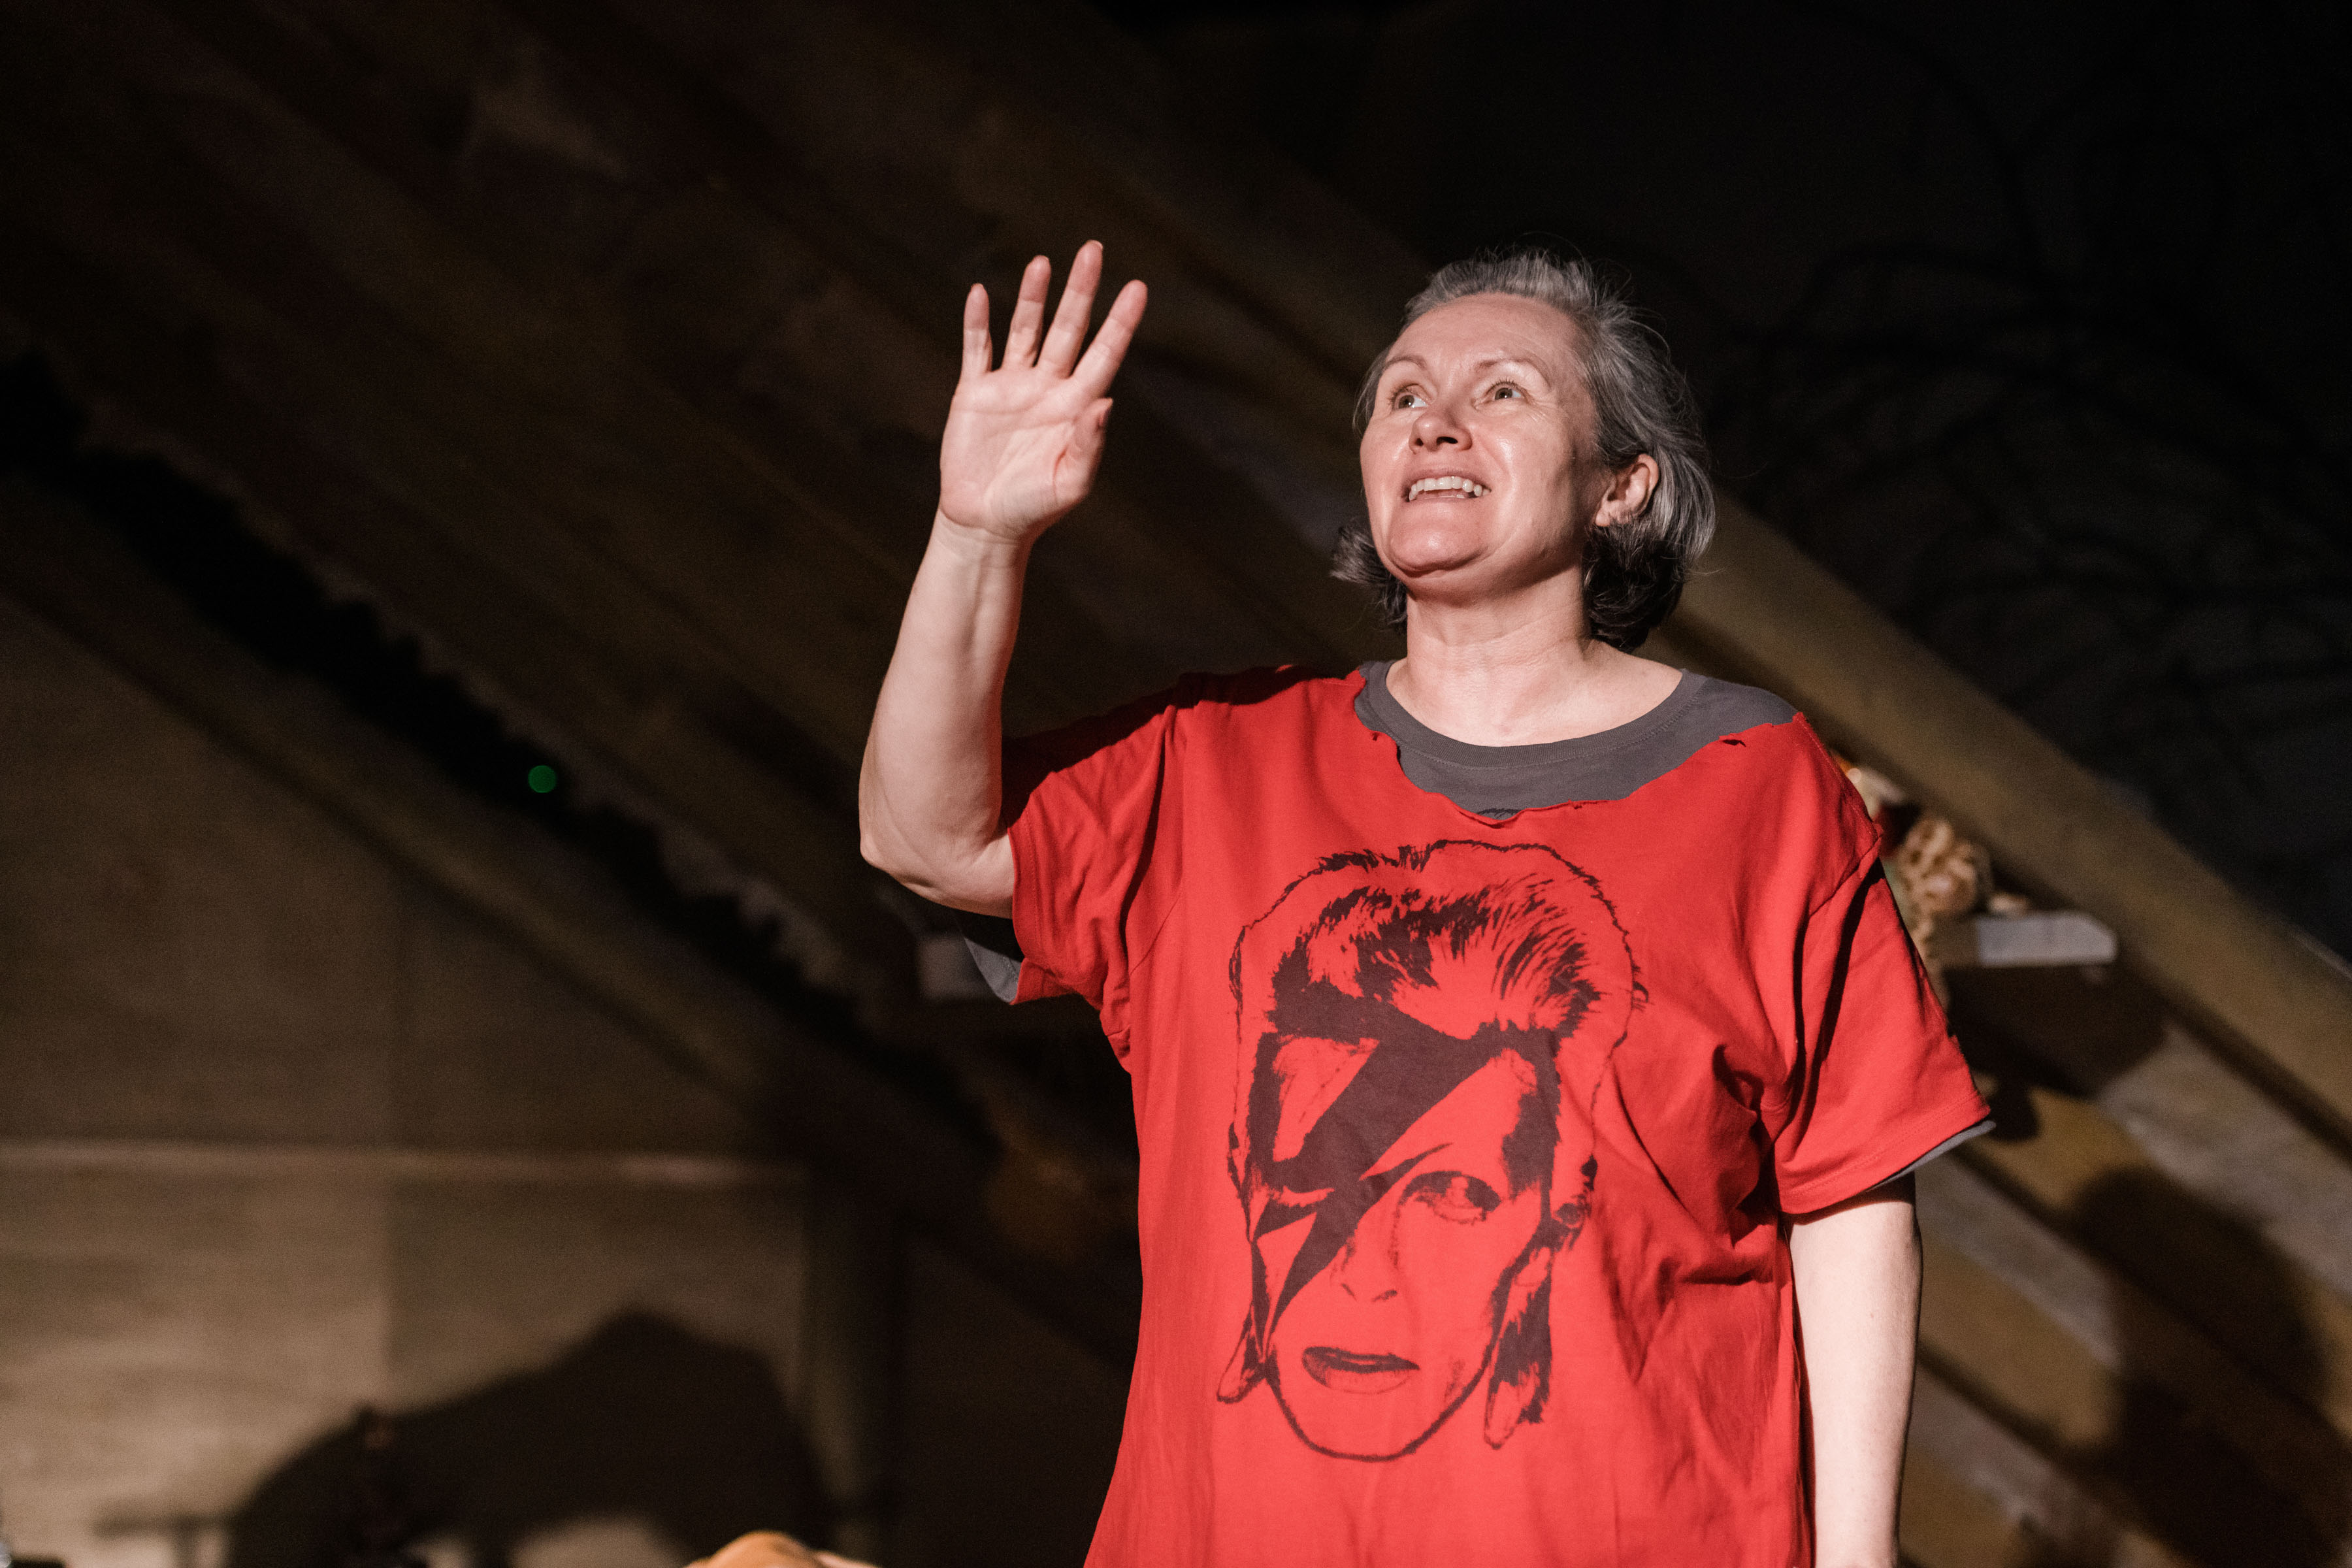 A middle aged white woman dressed in a red Bowie t-shirt, with one arm up